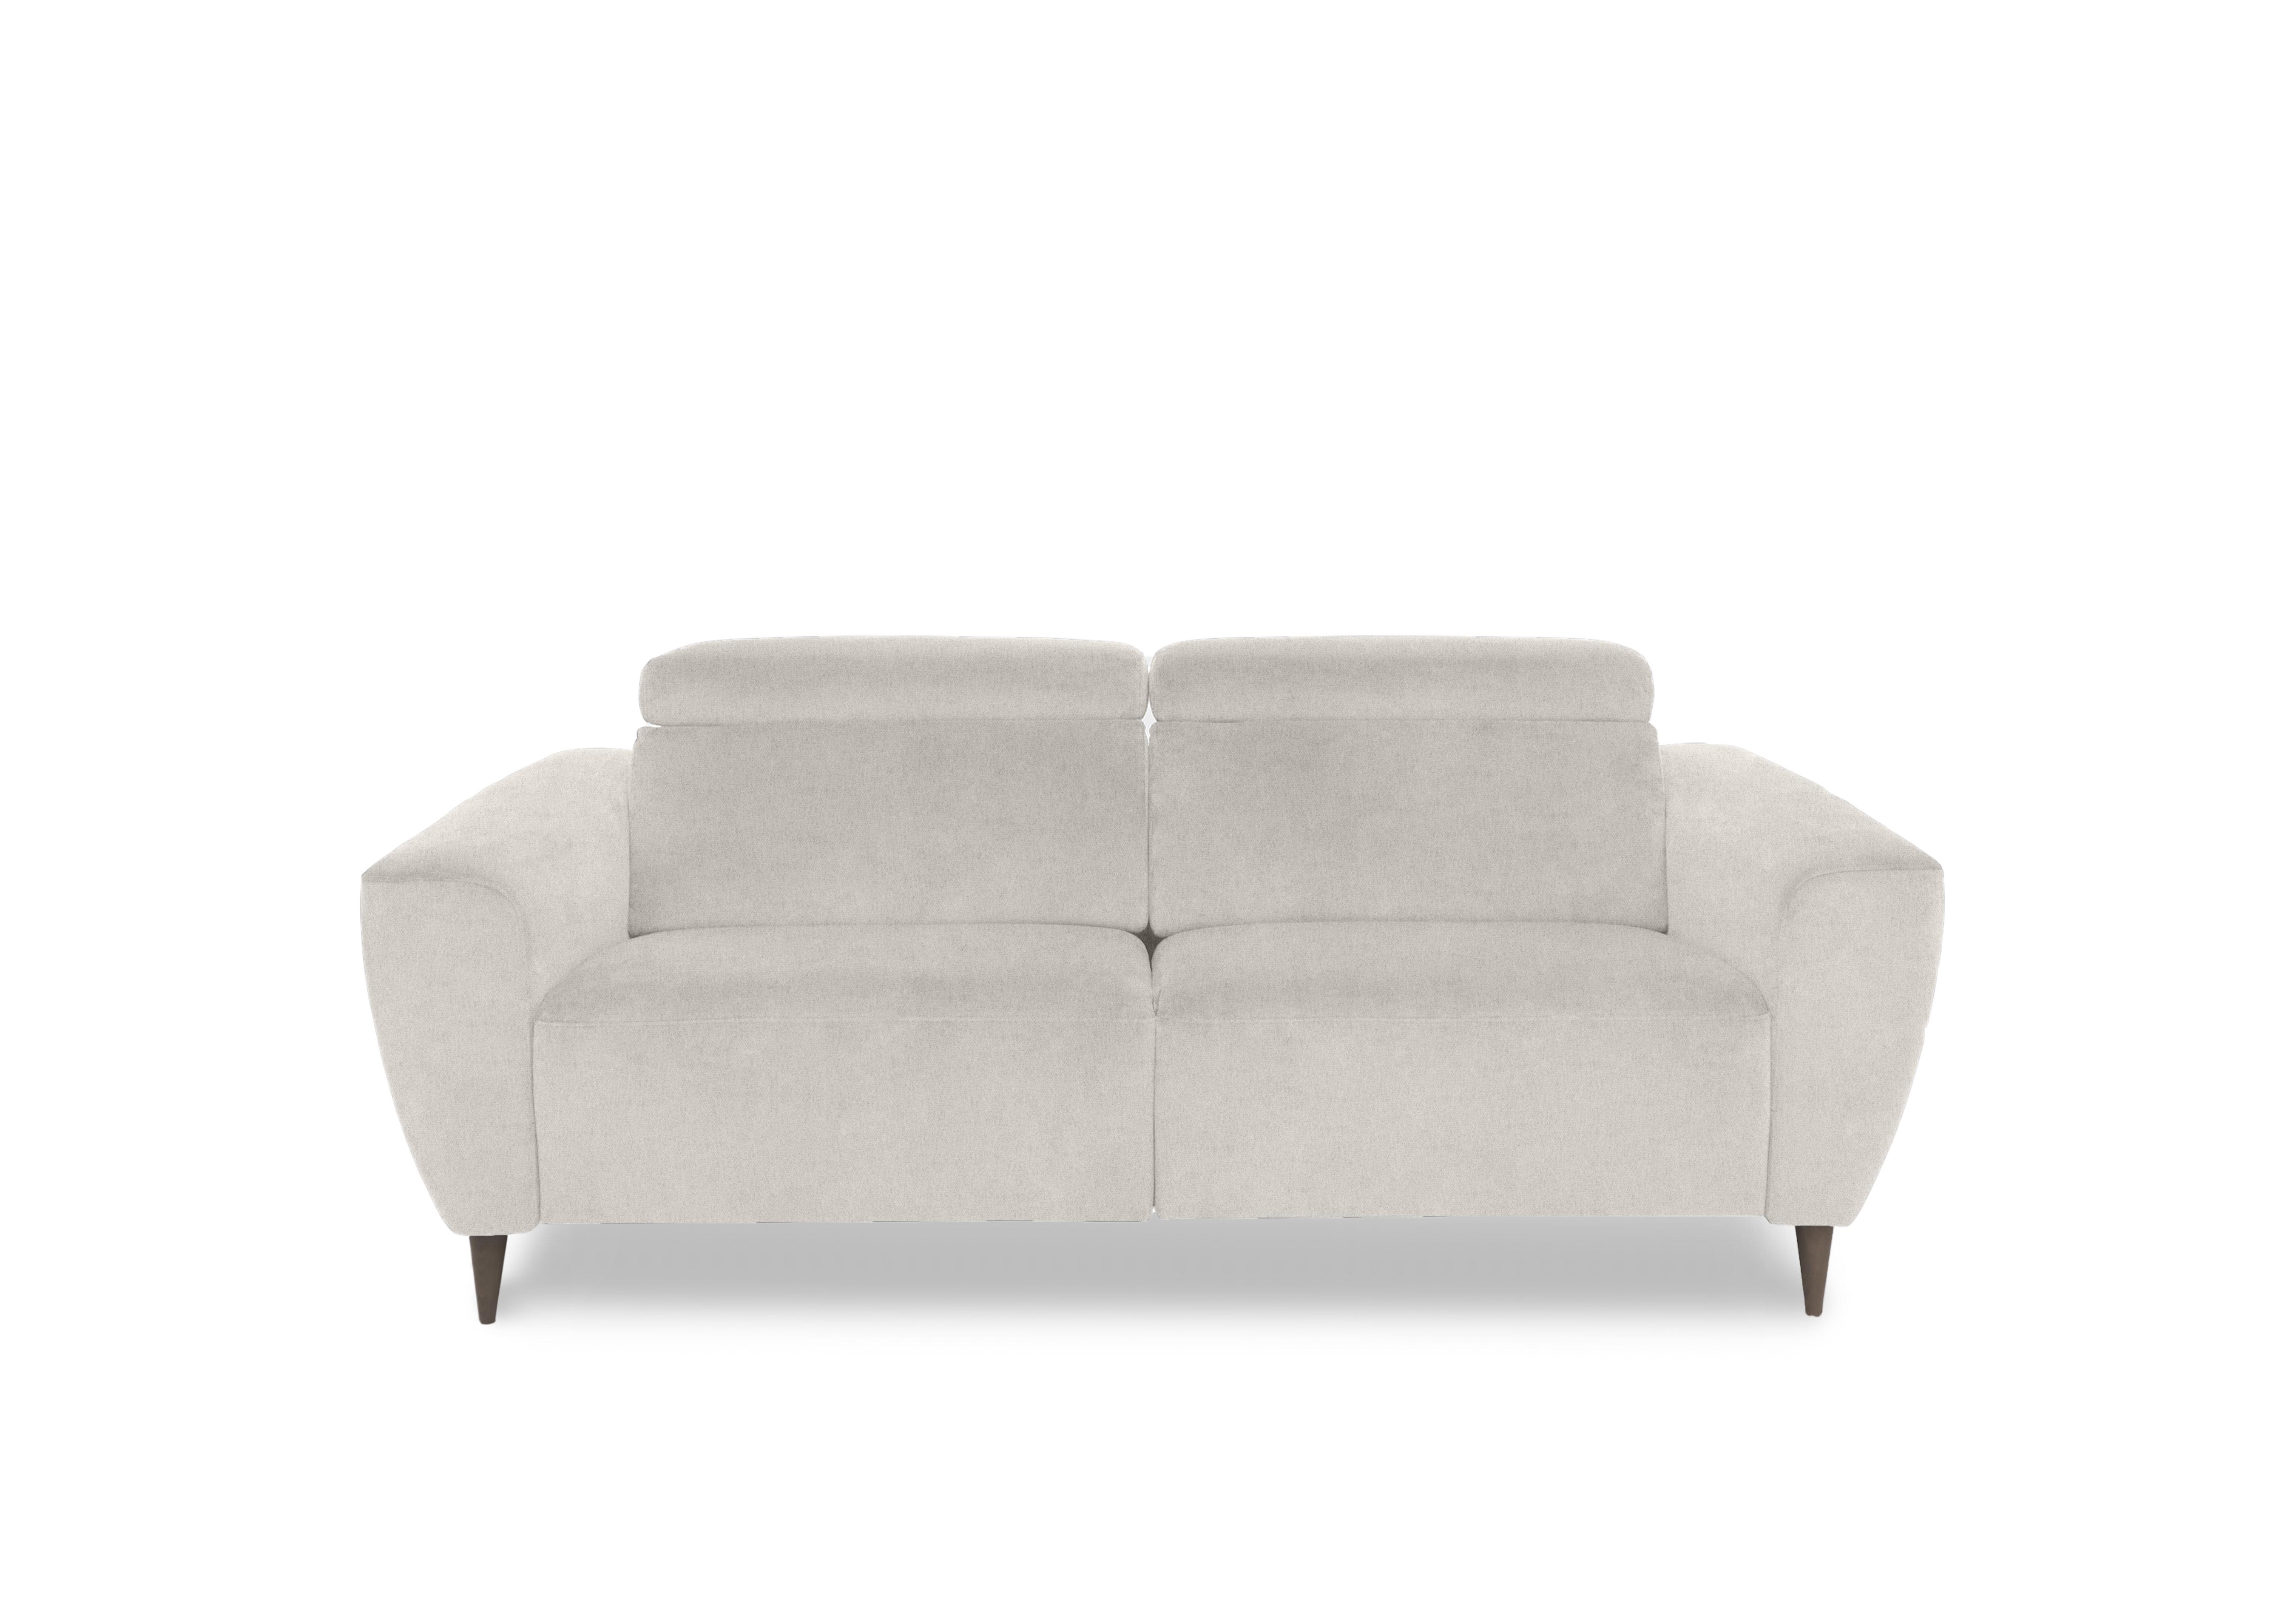 Milano 2.5 Seater Fabric Sofa in Fuente Beige To Ft on Furniture Village